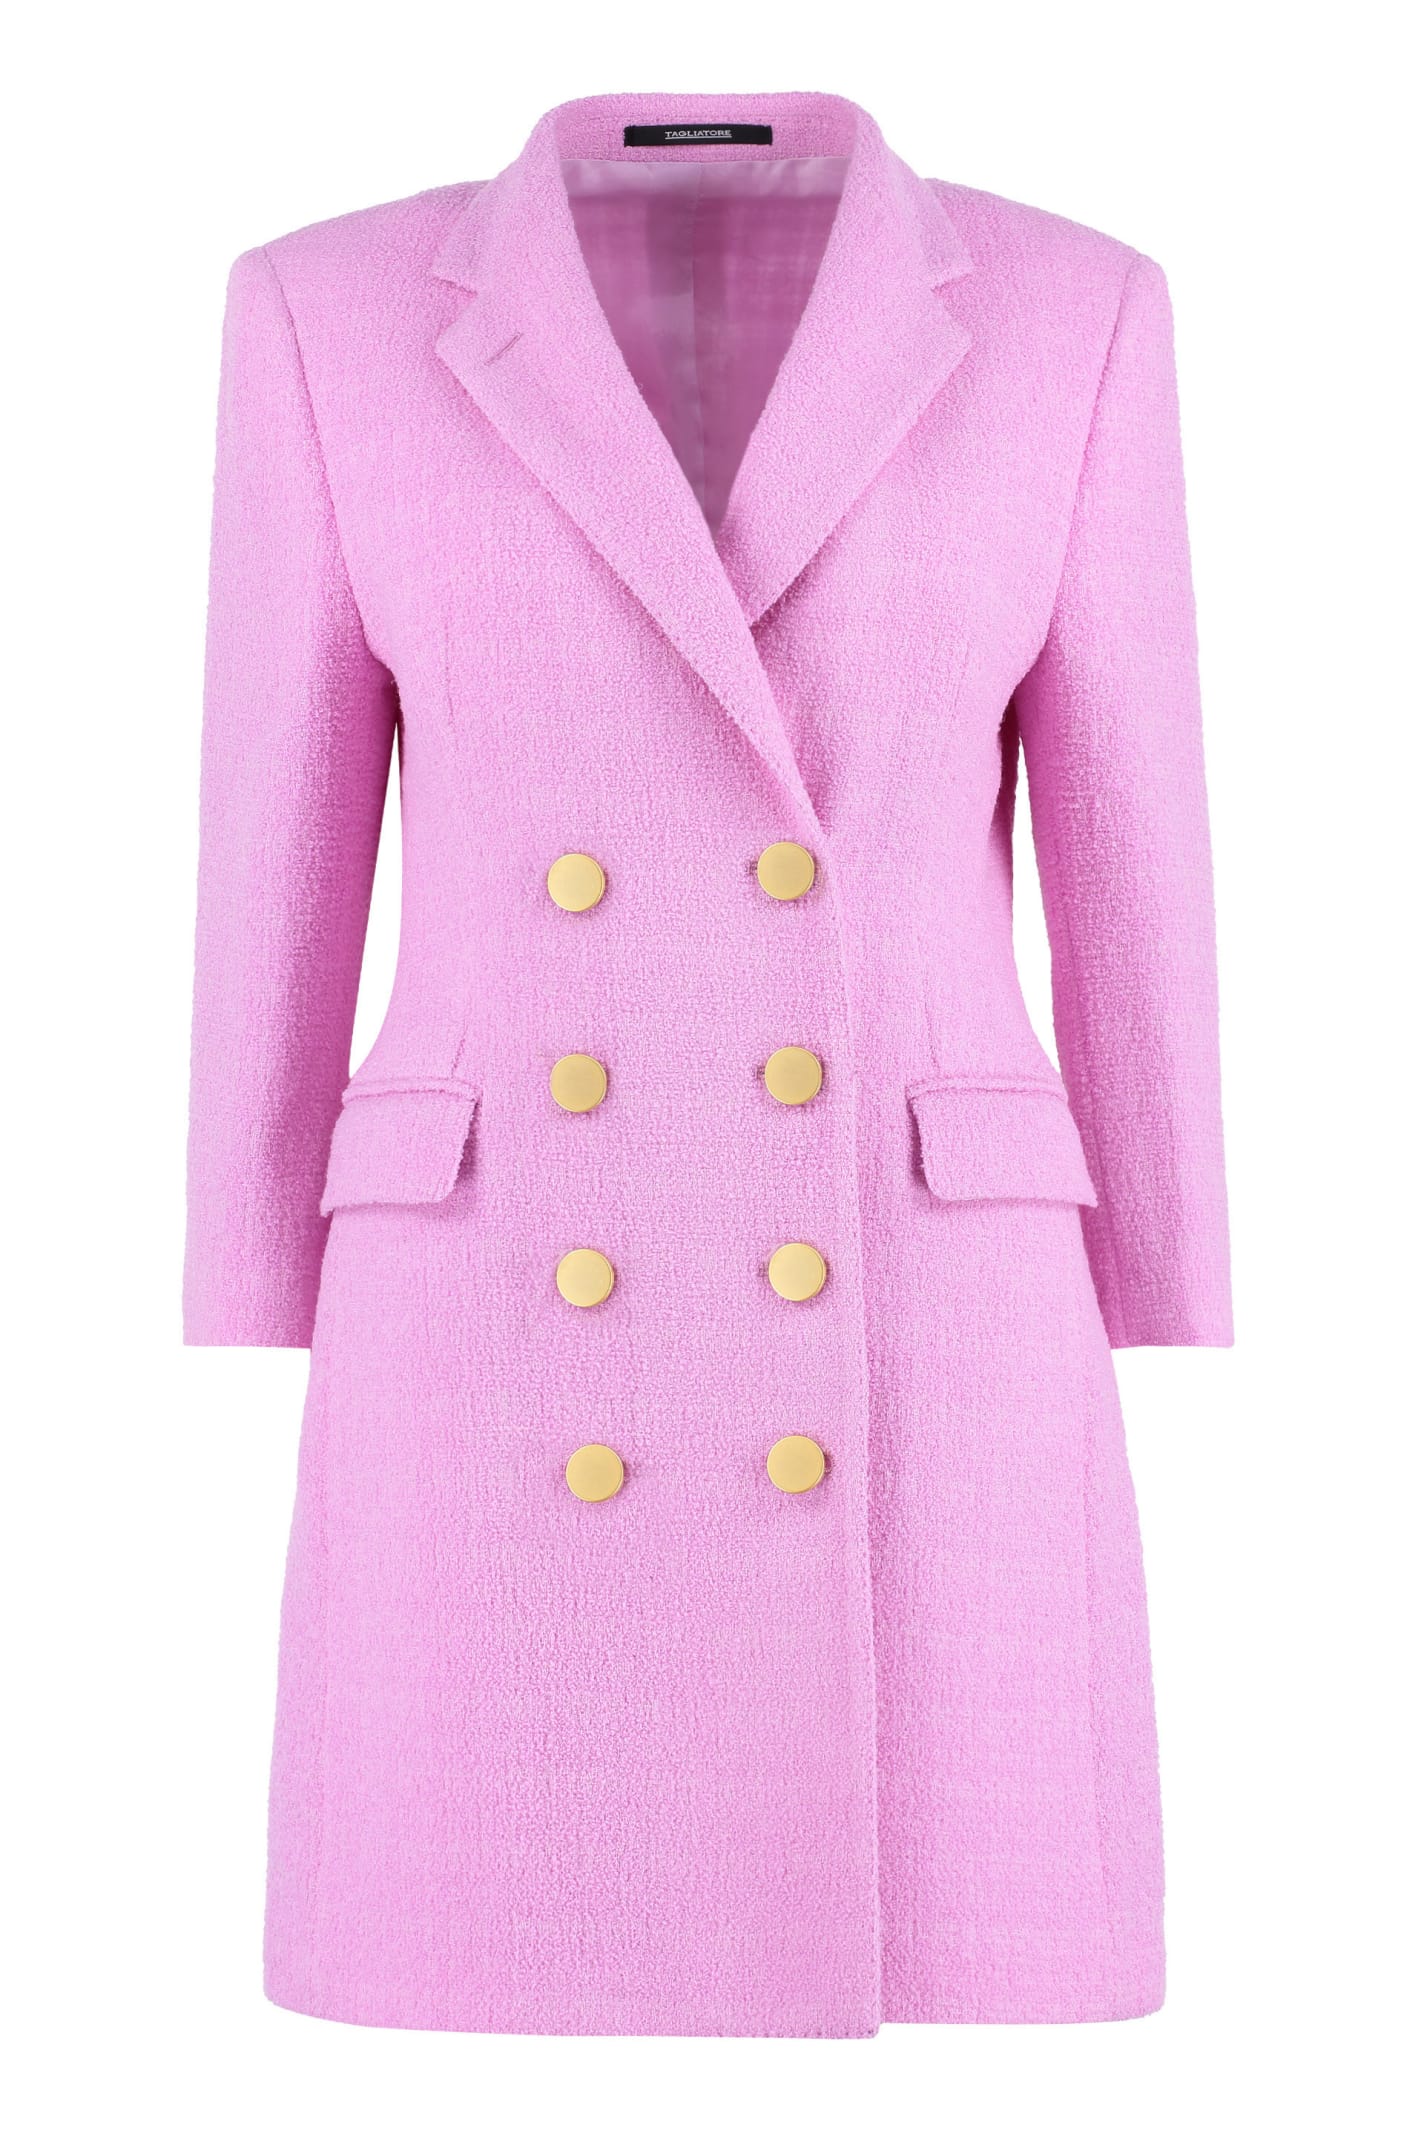 Tagliatore 0205 Annabelle Double-breasted Wool Coat